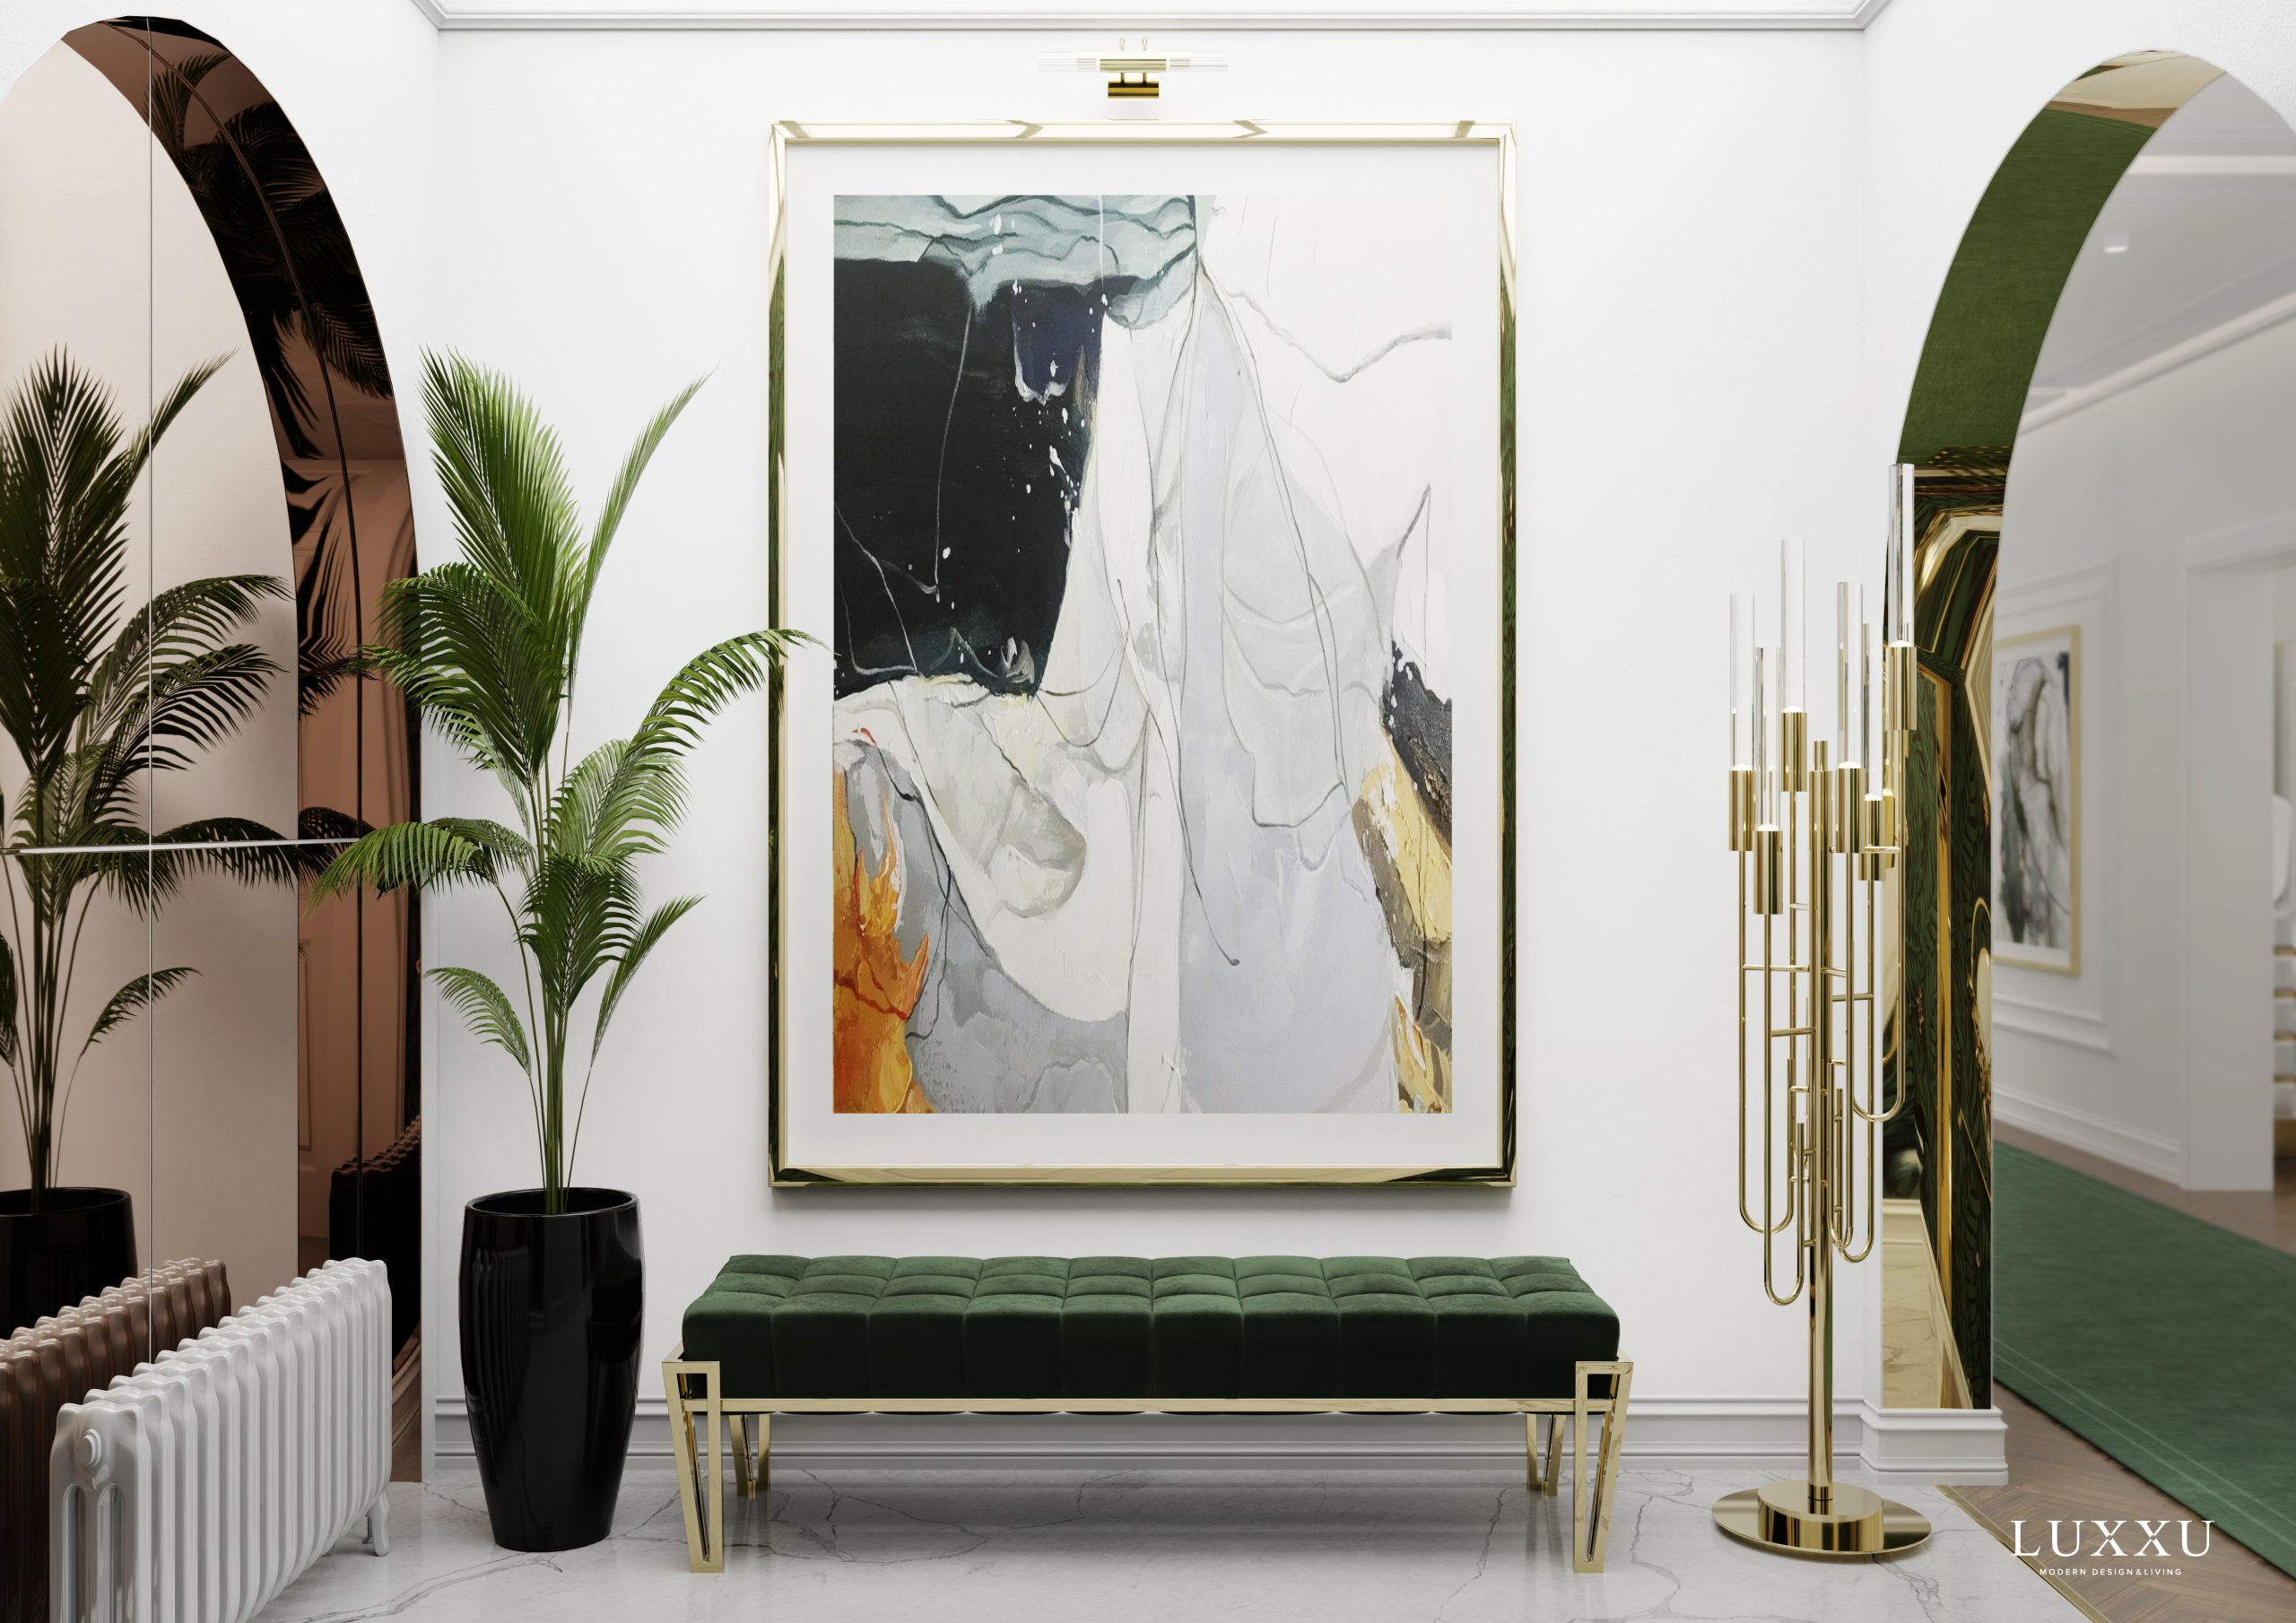 A Parisian apartment, inspired by the city of lights